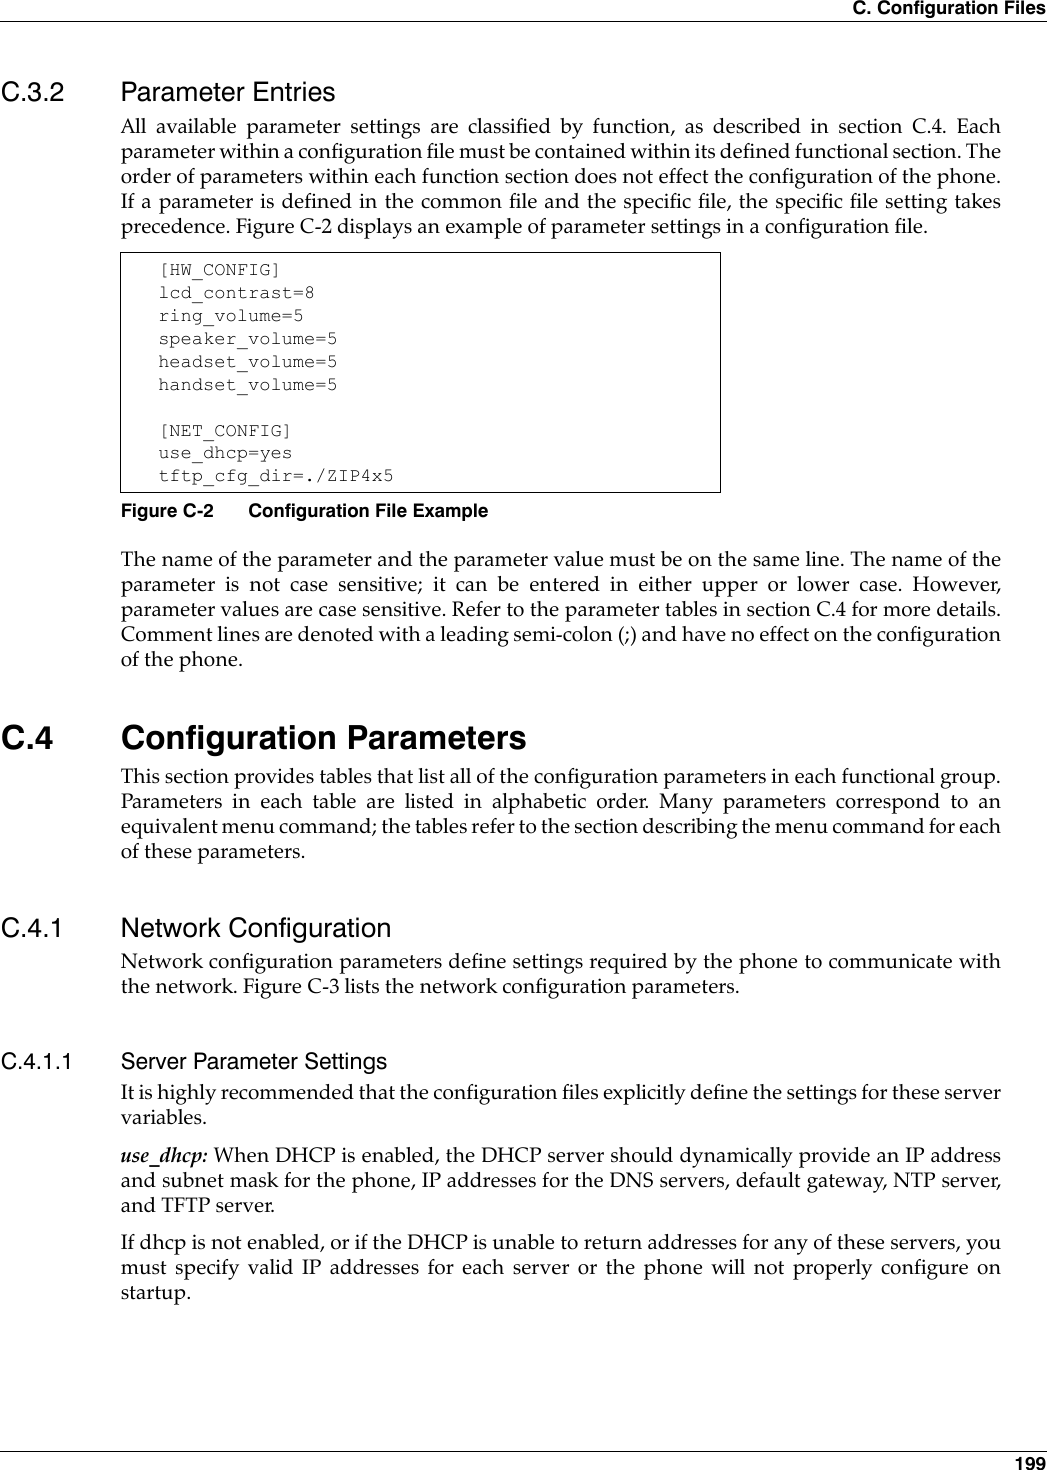 C. Configuration Files 199C.3.2 Parameter EntriesAll available parameter settings are classified by function, as described in section C.4. Eachparameter within a configuration file must be contained within its defined functional section. Theorder of parameters within each function section does not effect the configuration of the phone.If a parameter is defined in the common file and the specific file, the specific file setting takesprecedence. Figure C-2 displays an example of parameter settings in a configuration file.The name of the parameter and the parameter value must be on the same line. The name of theparameter is not case sensitive; it can be entered in either upper or lower case. However,parameter values are case sensitive. Refer to the parameter tables in section C.4 for more details.Comment lines are denoted with a leading semi-colon (;) and have no effect on the configurationof the phone.C.4 Configuration ParametersThis section provides tables that list all of the configuration parameters in each functional group.Parameters in each table are listed in alphabetic order. Many parameters correspond to anequivalent menu command; the tables refer to the section describing the menu command for eachof these parameters.C.4.1 Network ConfigurationNetwork configuration parameters define settings required by the phone to communicate withthe network. Figure C-3 lists the network configuration parameters.C.4.1.1 Server Parameter SettingsIt is highly recommended that the configuration files explicitly define the settings for these servervariables.use_dhcp: When DHCP is enabled, the DHCP server should dynamically provide an IP addressand subnet mask for the phone, IP addresses for the DNS servers, default gateway, NTP server,and TFTP server. If dhcp is not enabled, or if the DHCP is unable to return addresses for any of these servers, youmust specify valid IP addresses for each server or the phone will not properly configure onstartup.[HW_CONFIG]lcd_contrast=8ring_volume=5speaker_volume=5headset_volume=5handset_volume=5[NET_CONFIG]use_dhcp=yestftp_cfg_dir=./ZIP4x5Figure C-2 Configuration File Example